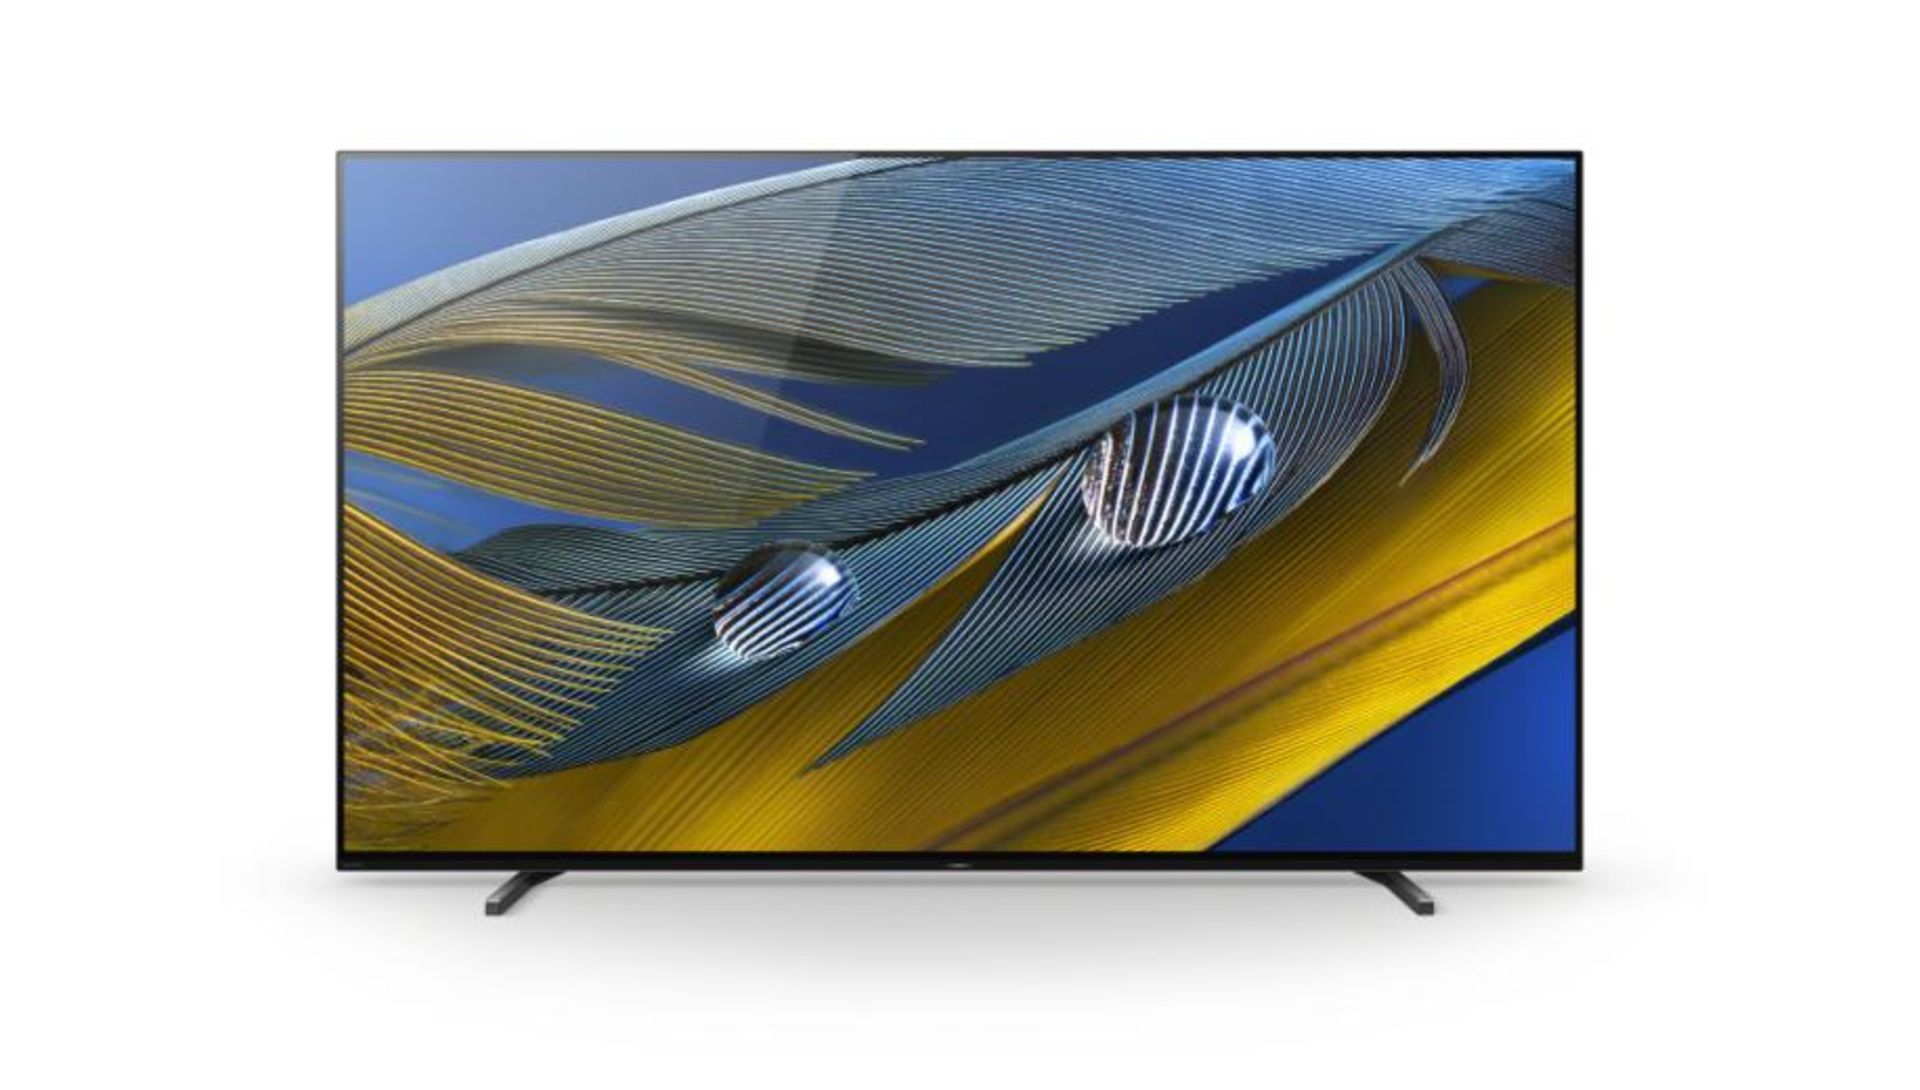 1 SONY BRAVIA XR-65A80J 65" 4K ULTRA HD SMART TV RWITH STAND AND REMOTE RP Ã‚Â£1599 (WORKING,